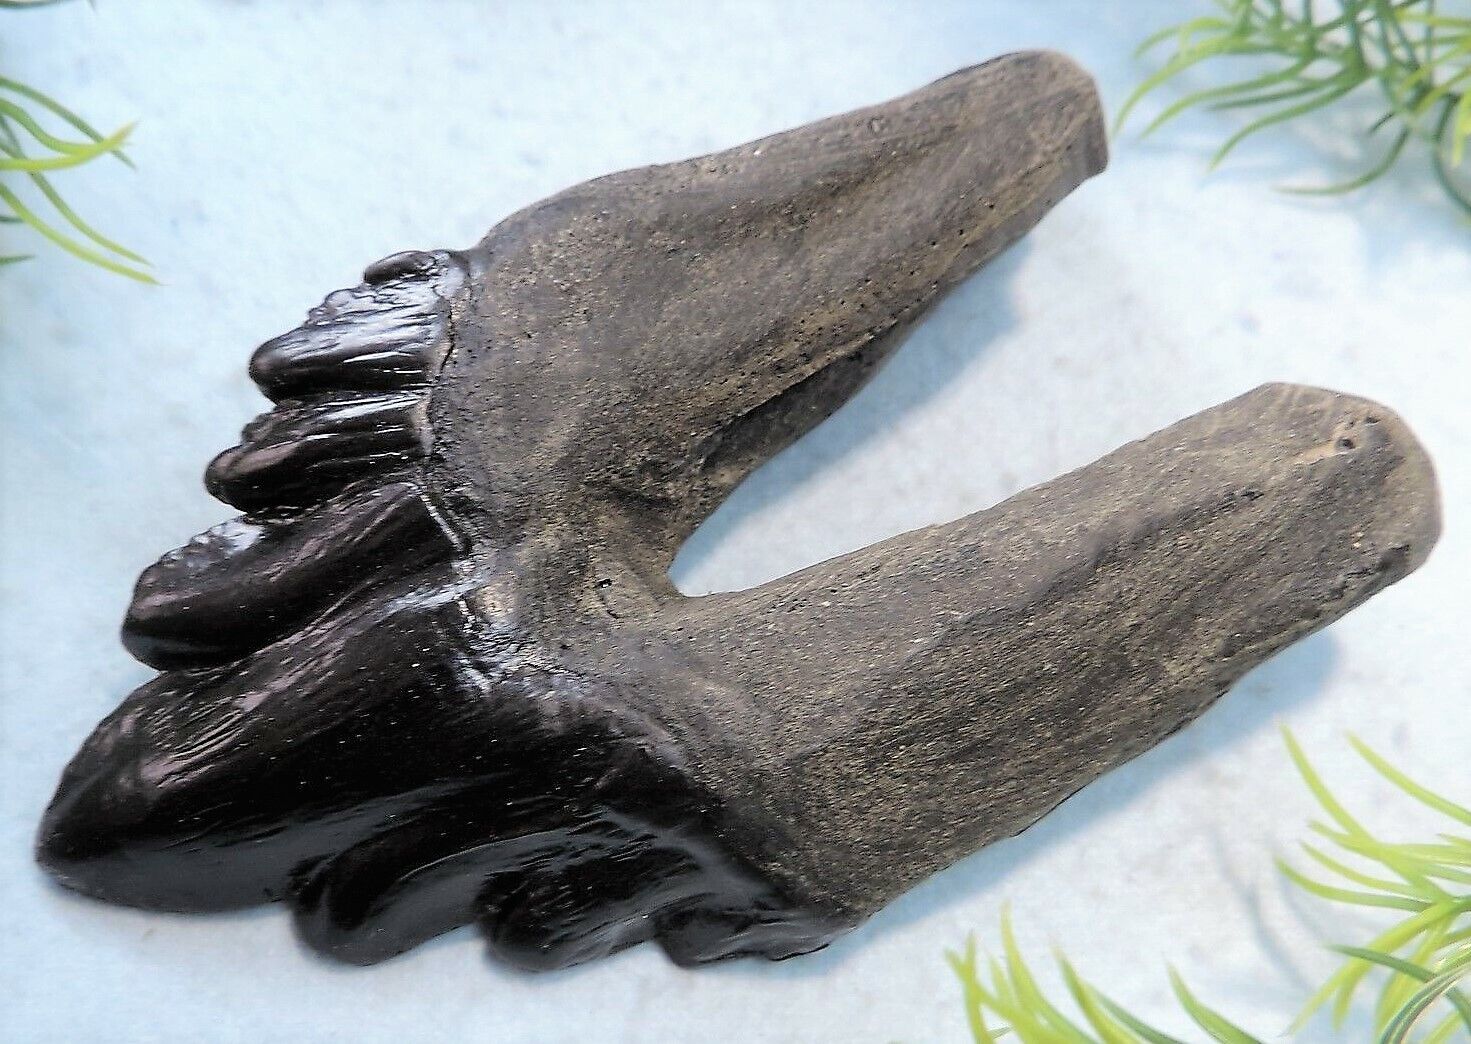 4 INCH LONG ARCHAEOCETE RESIN REPLICA EXTINCT WHALE TOOTH FOSS...